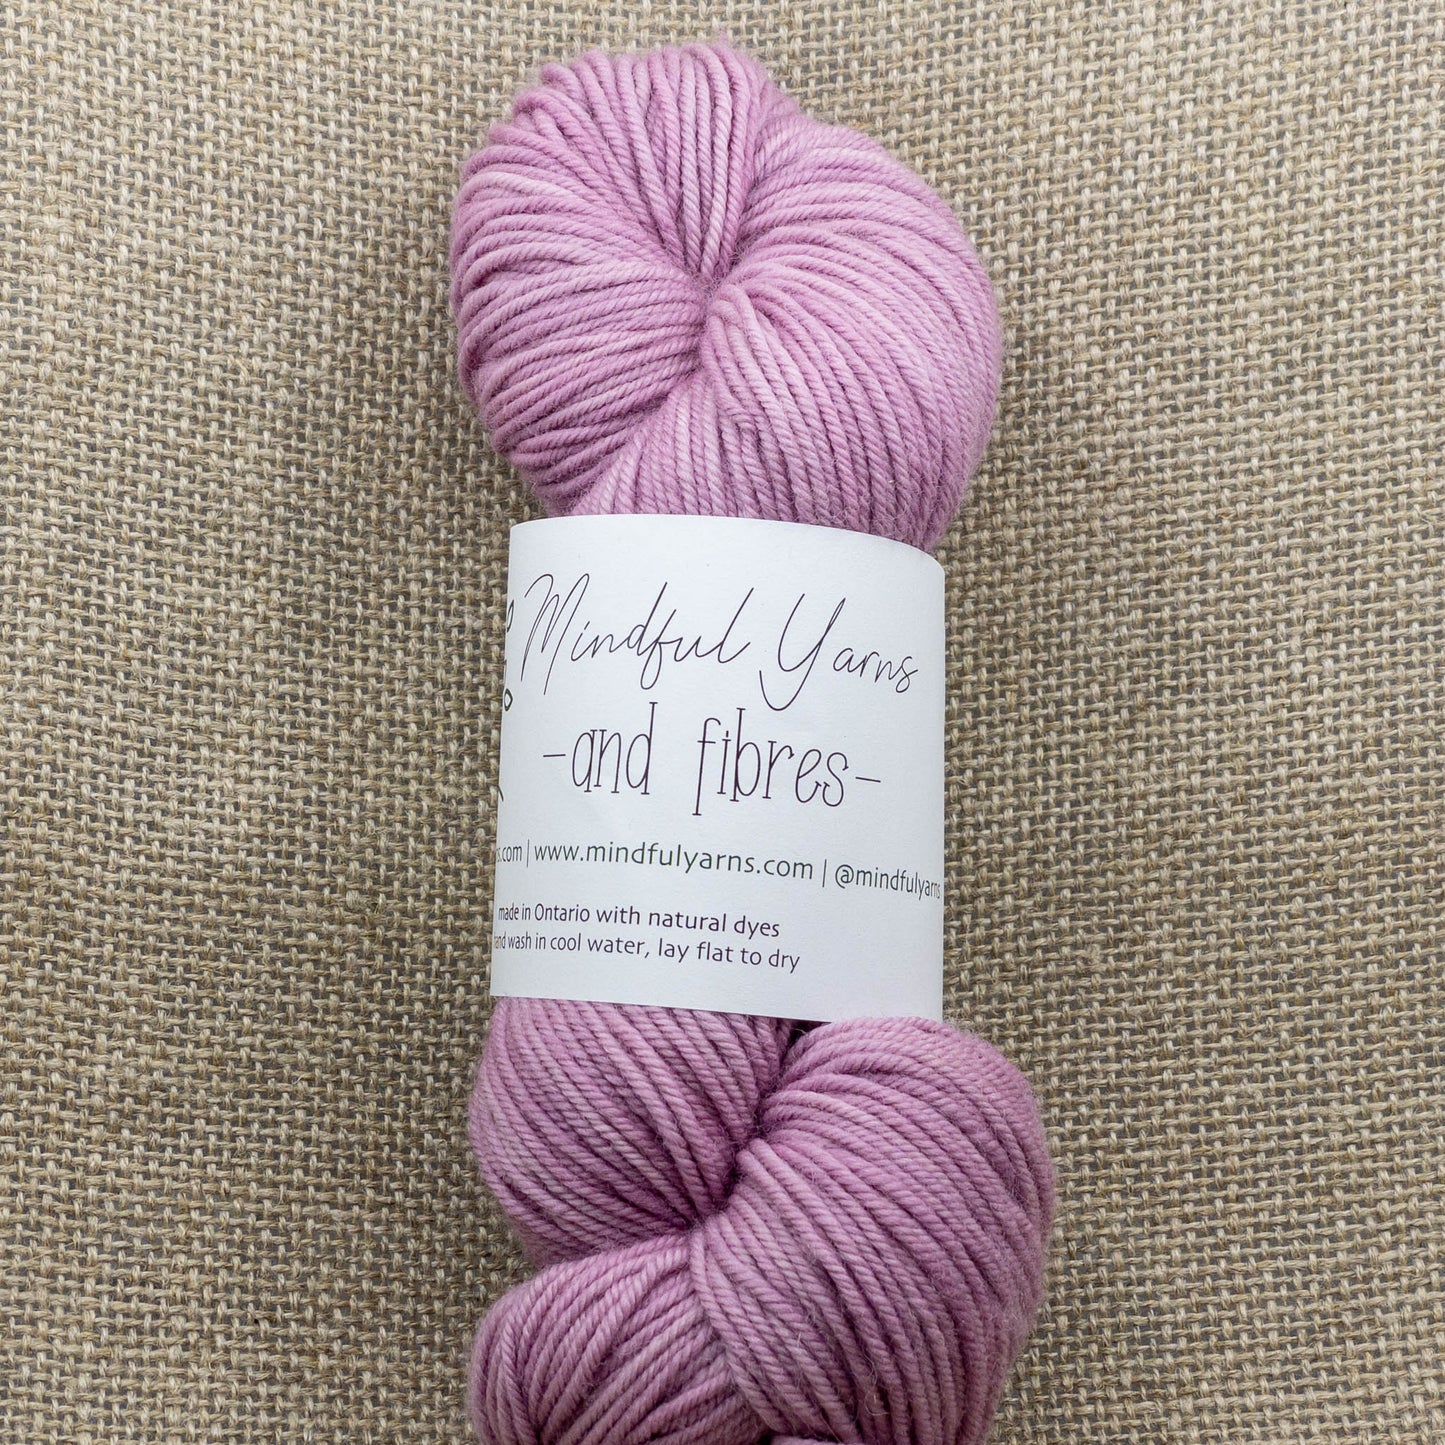 Organic Worsted Weight Wool - Mindful Yarns - Lac light